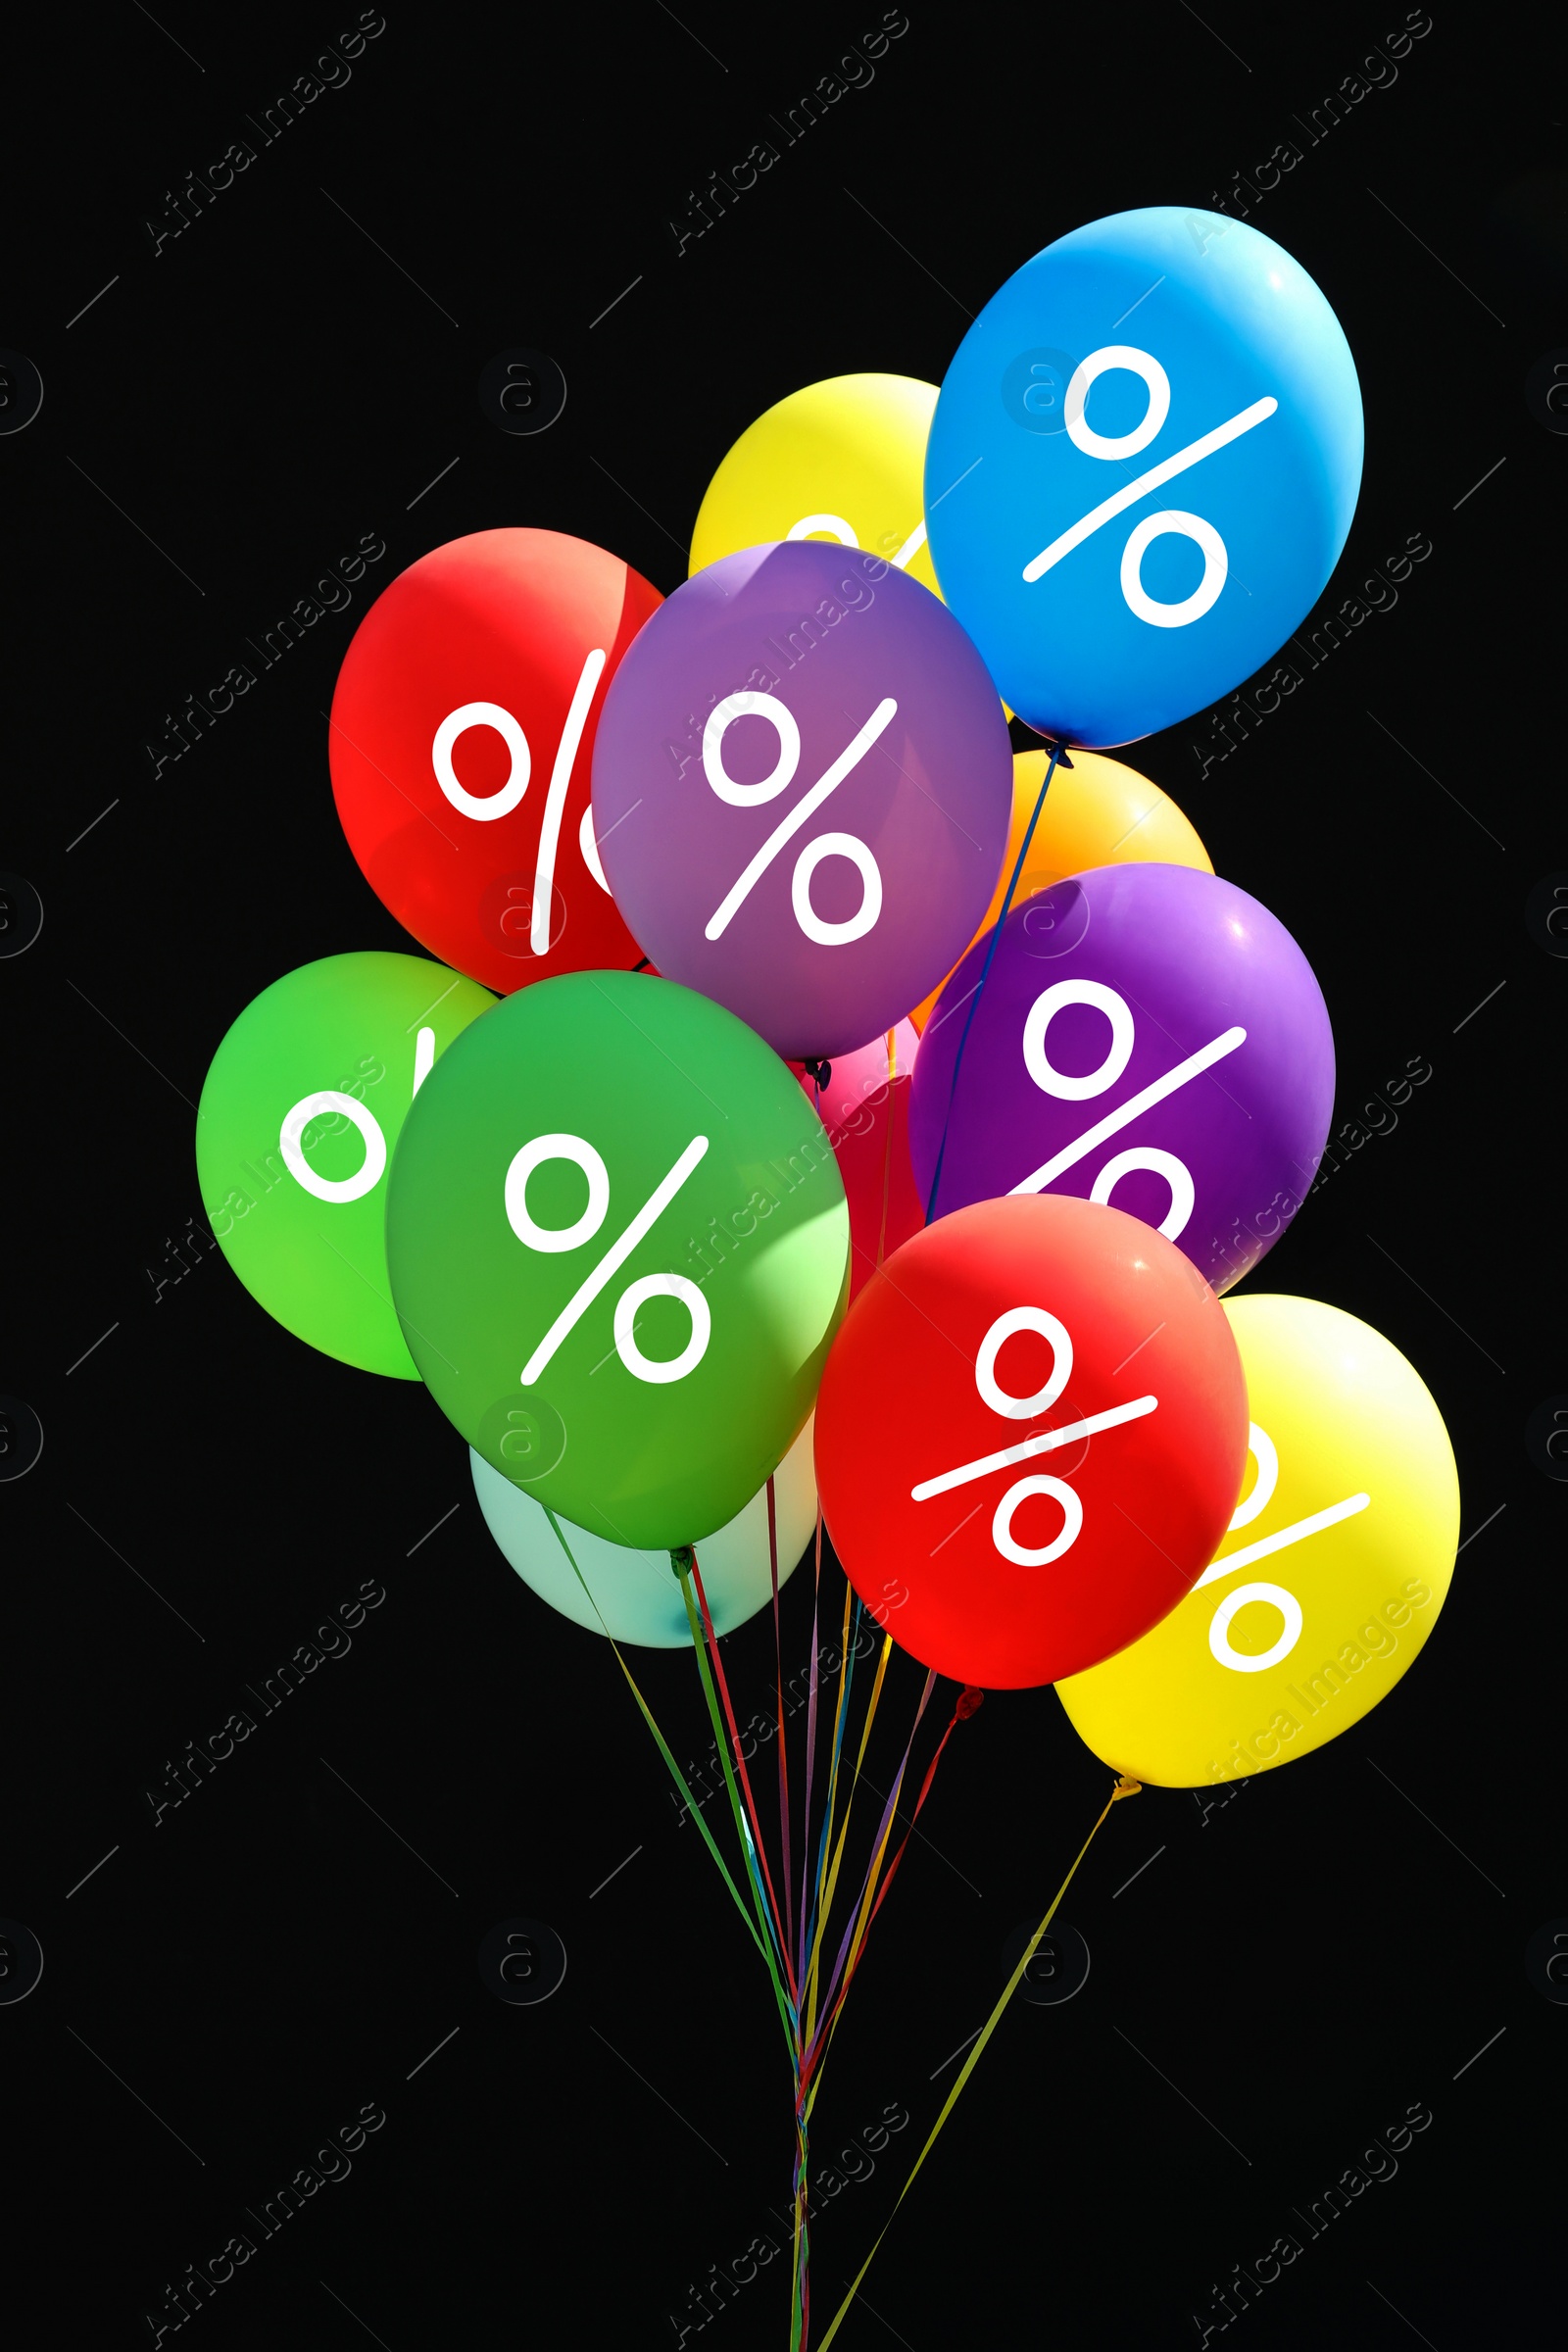 Image of Discount offer. Bunch of balloons with percent signs against black background